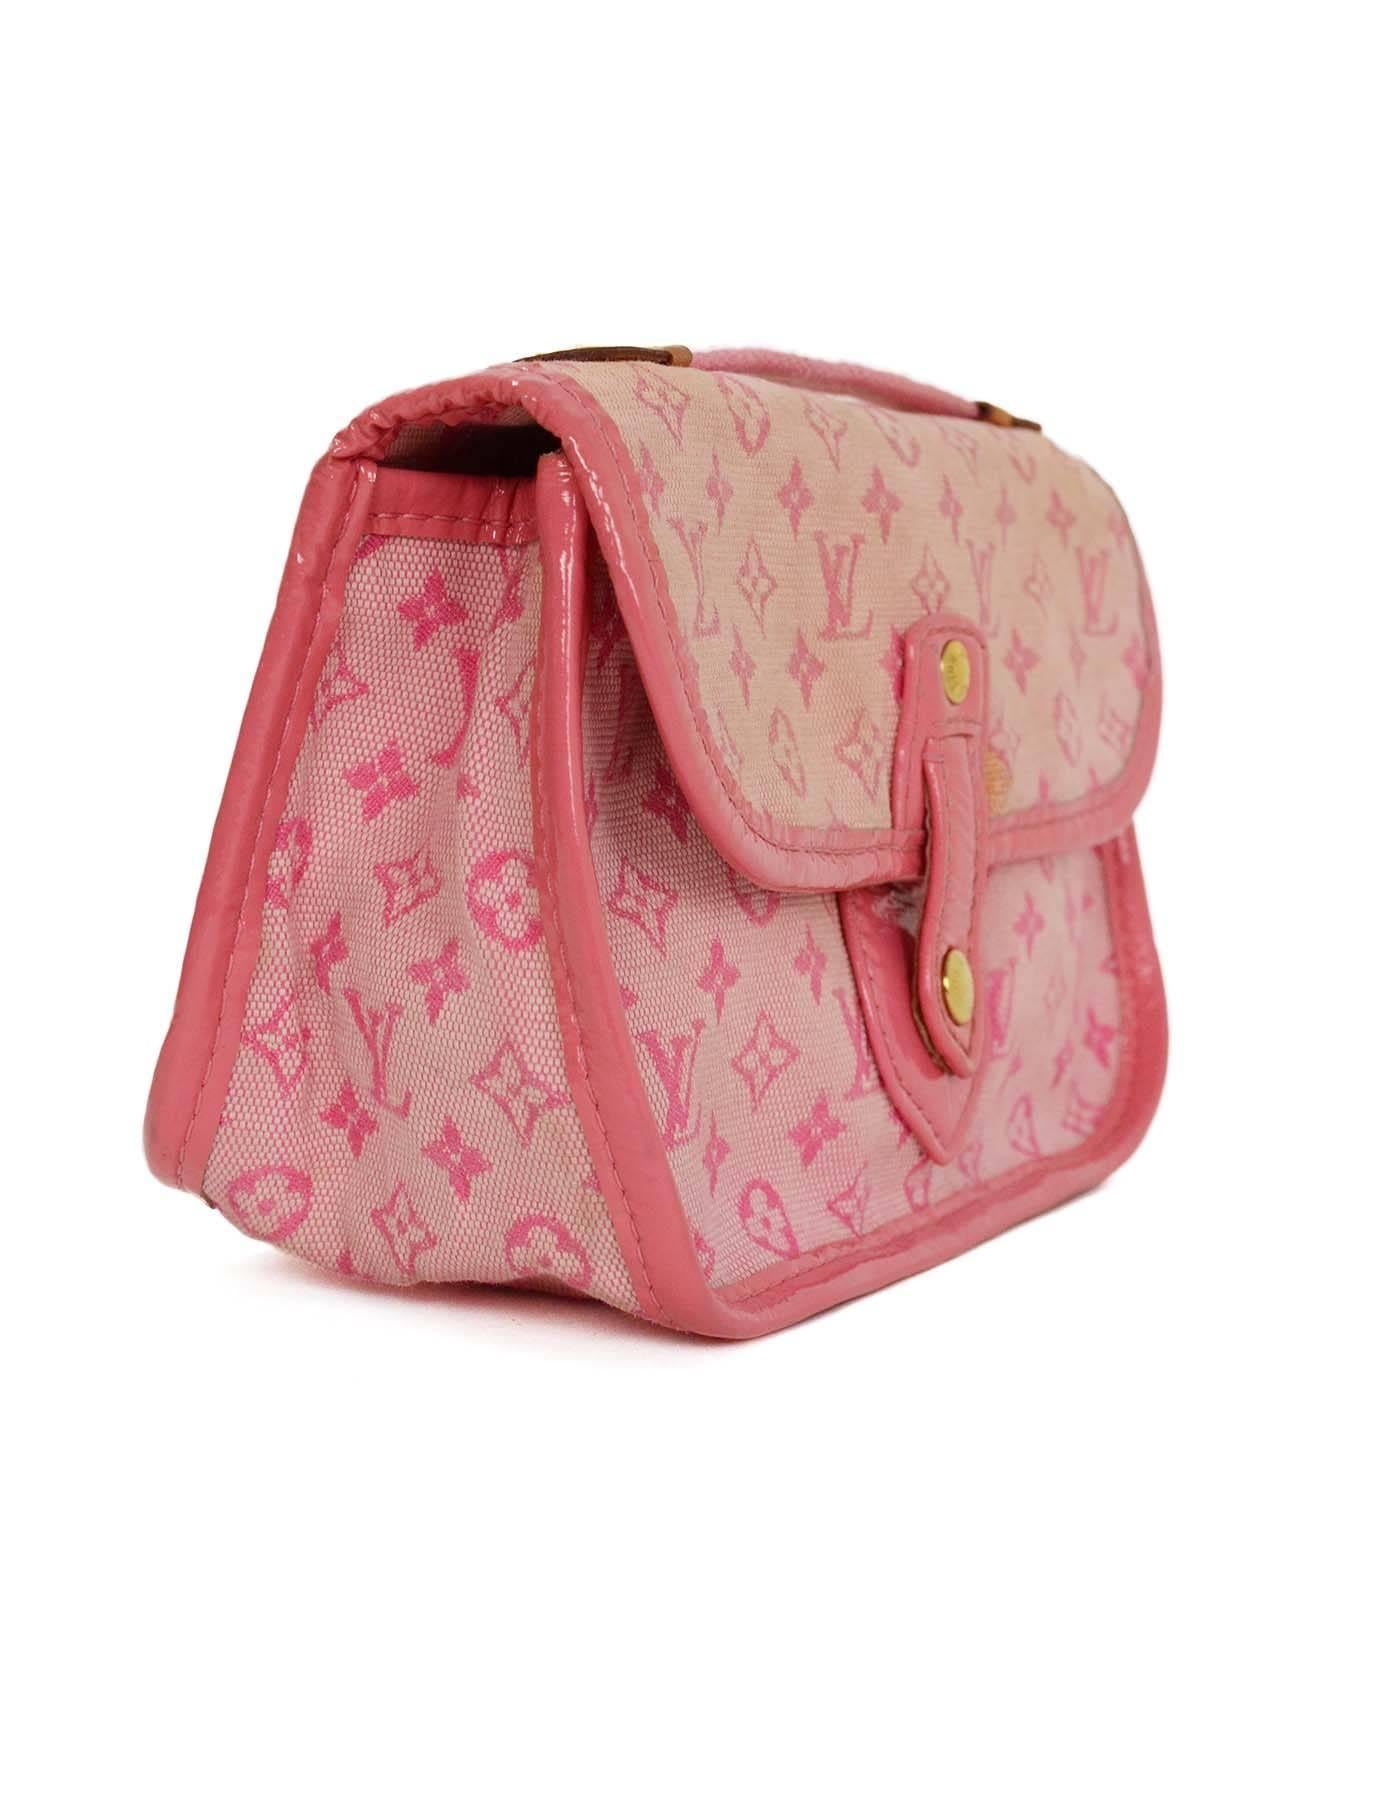 Louis Vuitton Pink Mini Lin Mary Kate Pochette GHW
Features two toned pink monogram LV pattern throughout
Made In: France
Year of Production: 2003
Color: Pink
Hardware: Goldtone
Materials: Canvas and patent leather
Lining: Pink